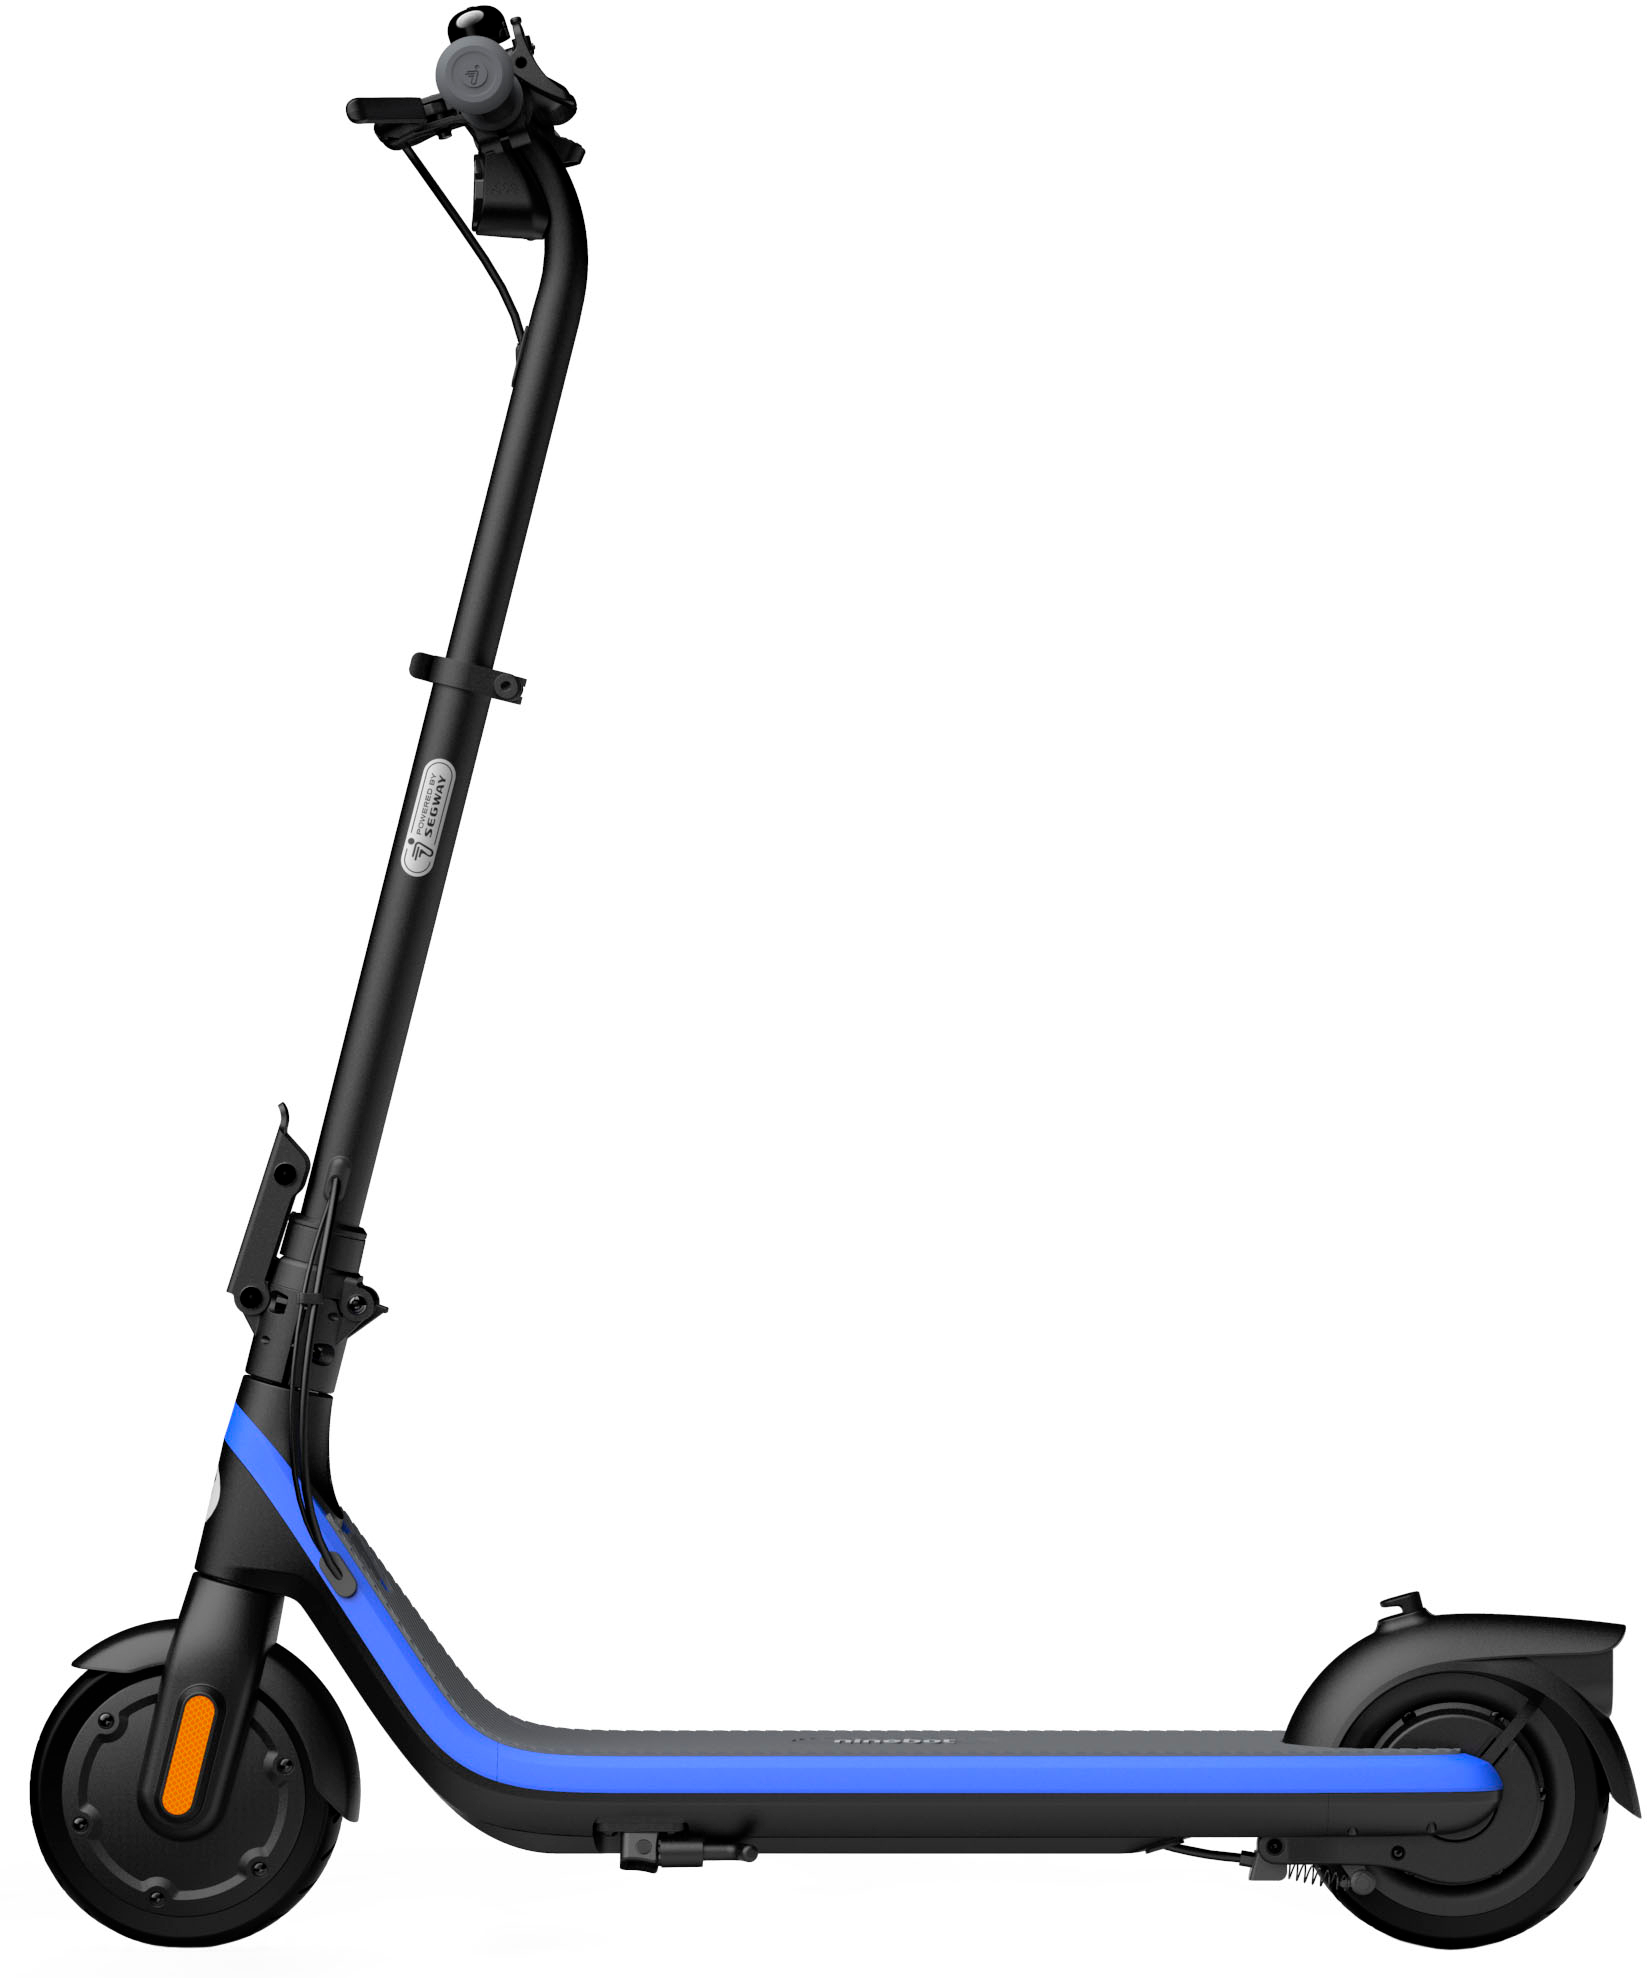 Angle View: Segway - Super Scooter GT2 Series w/55.9 Max Operating Range & 43.5 mph Max Speed - Megatron